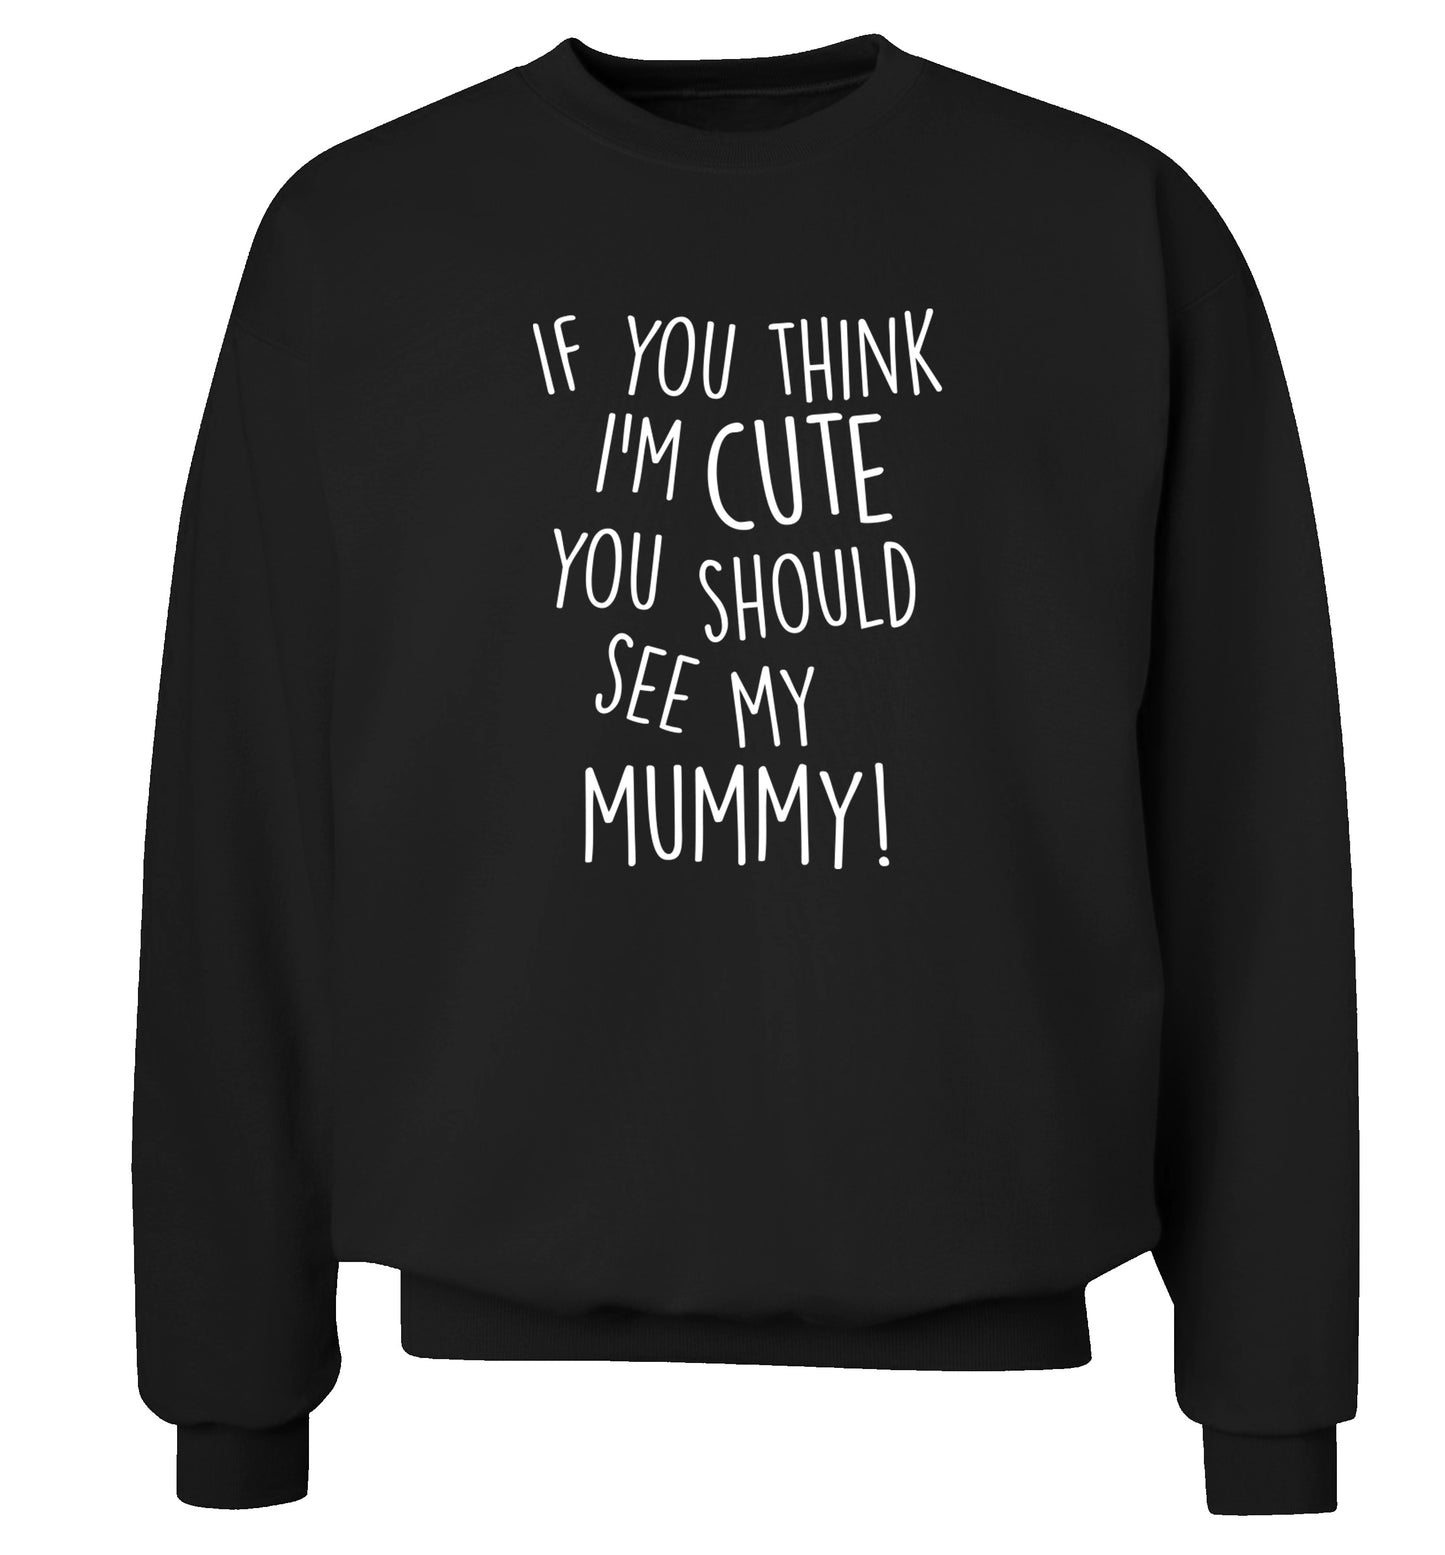 If you think I'm cute you should see my mummy Adult's unisex black Sweater 2XL